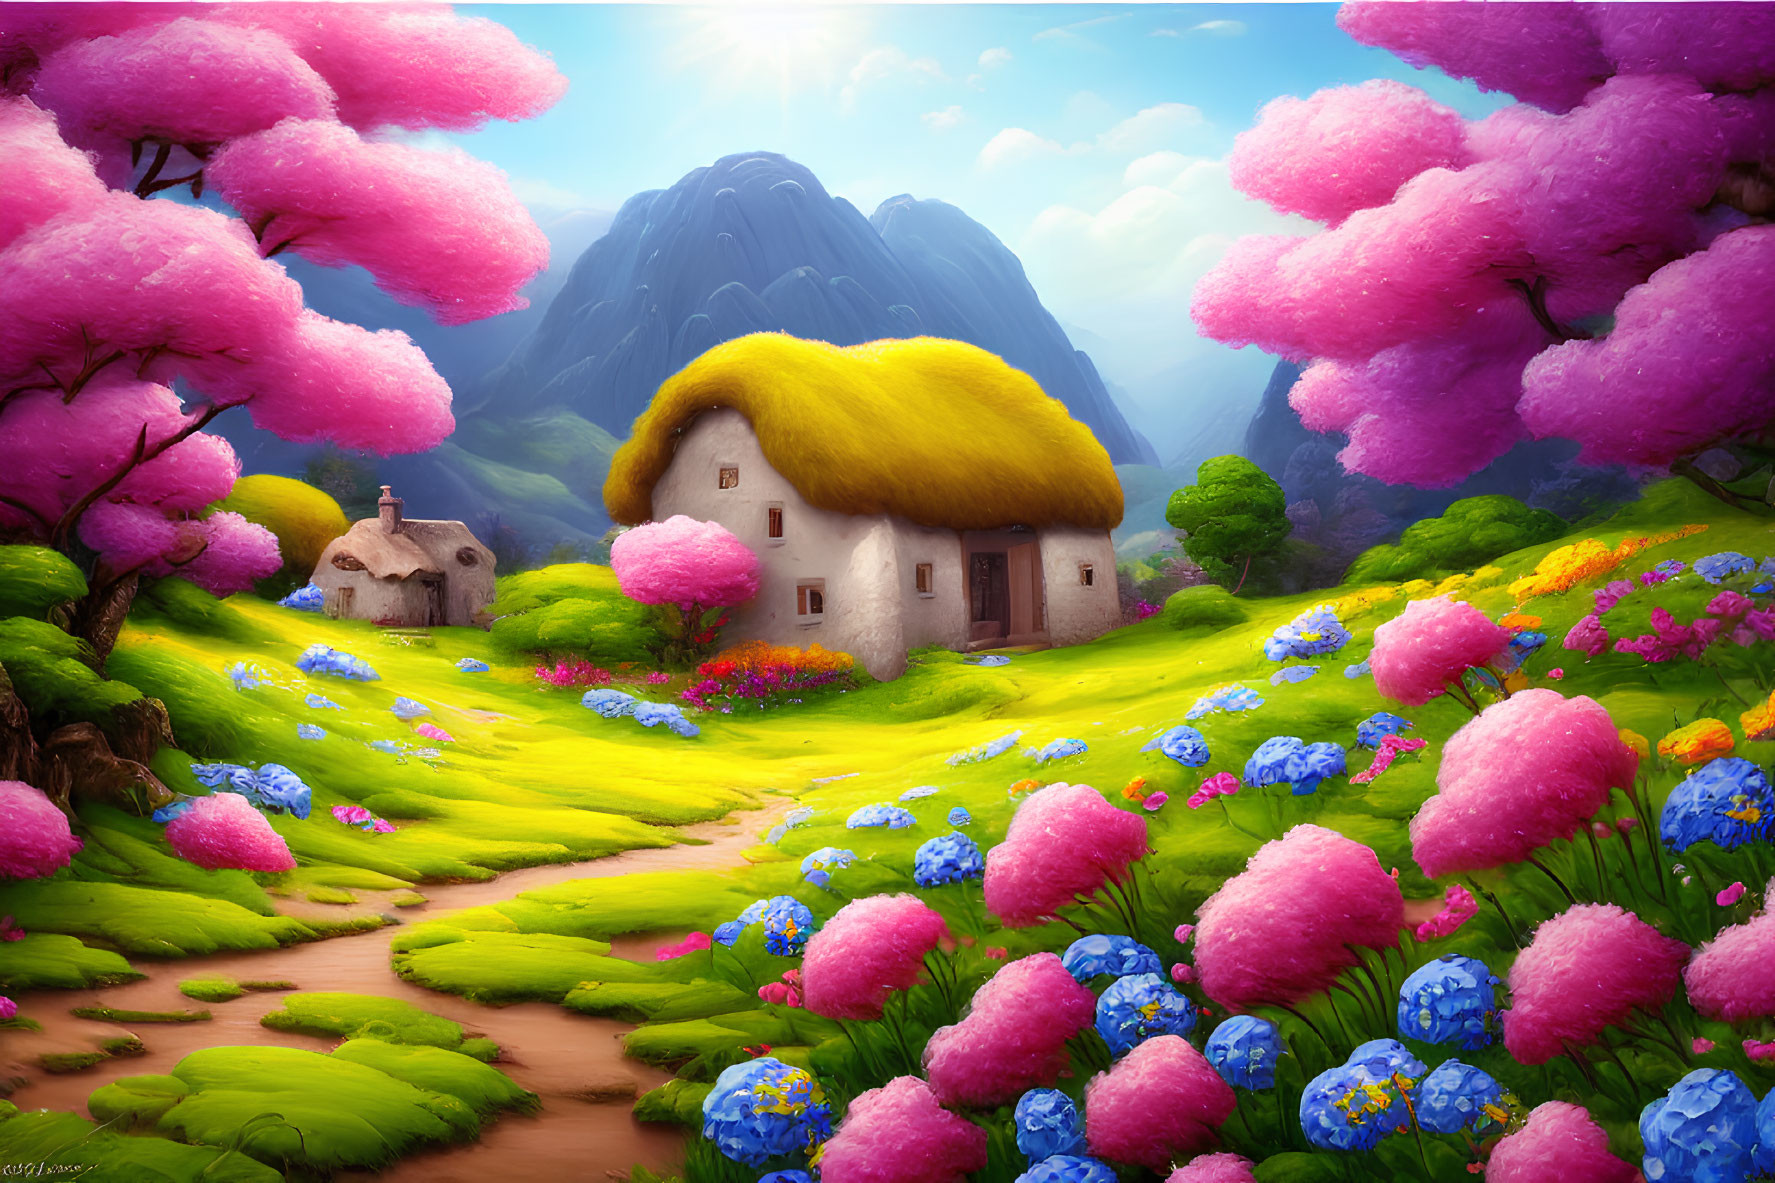 Vibrant pink trees and thatched cottage in idyllic landscape